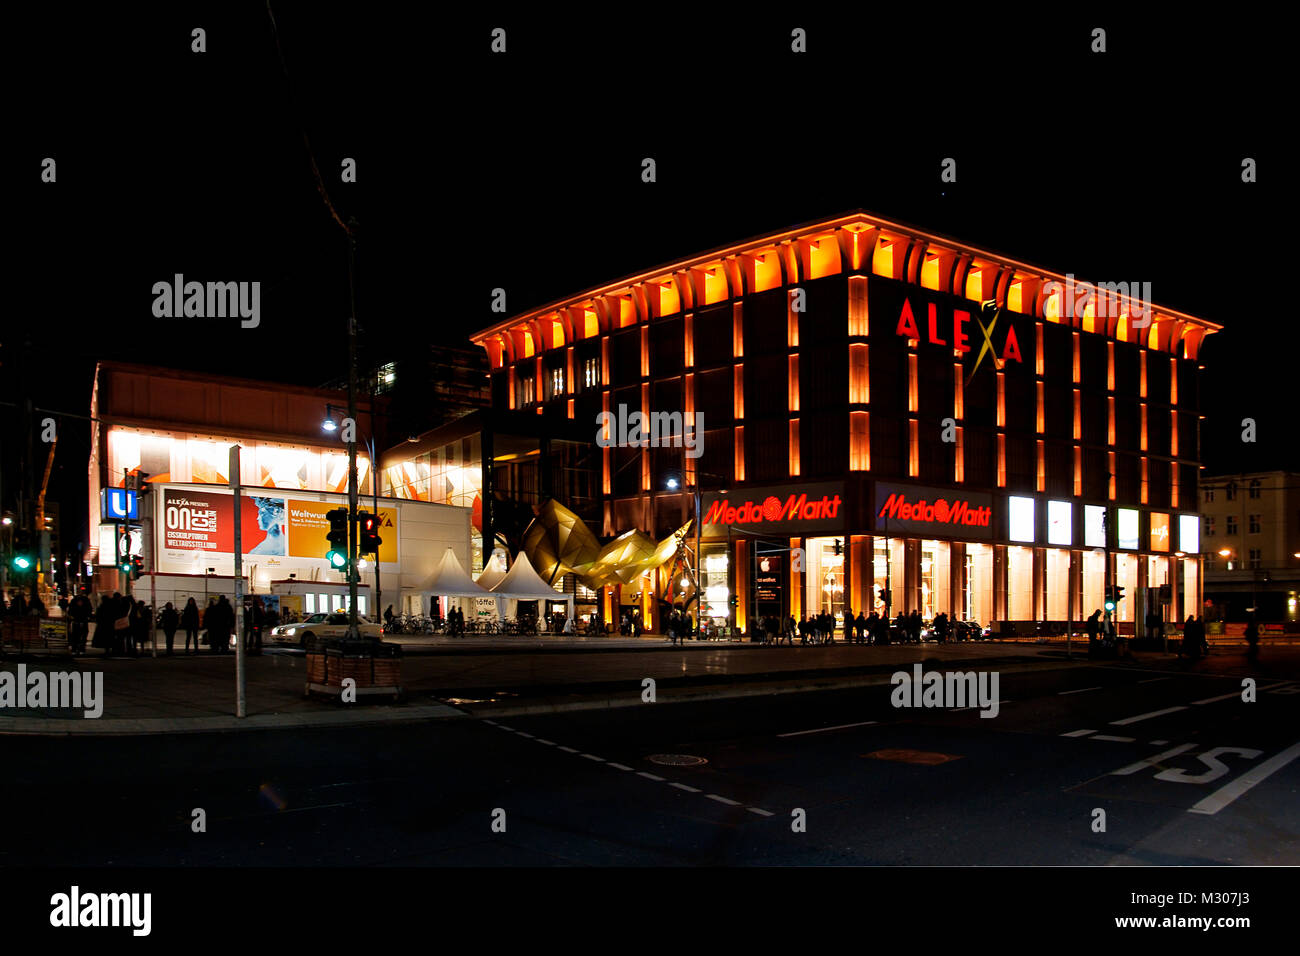 Mediamarkt hi-res stock and images Page 2 - Alamy